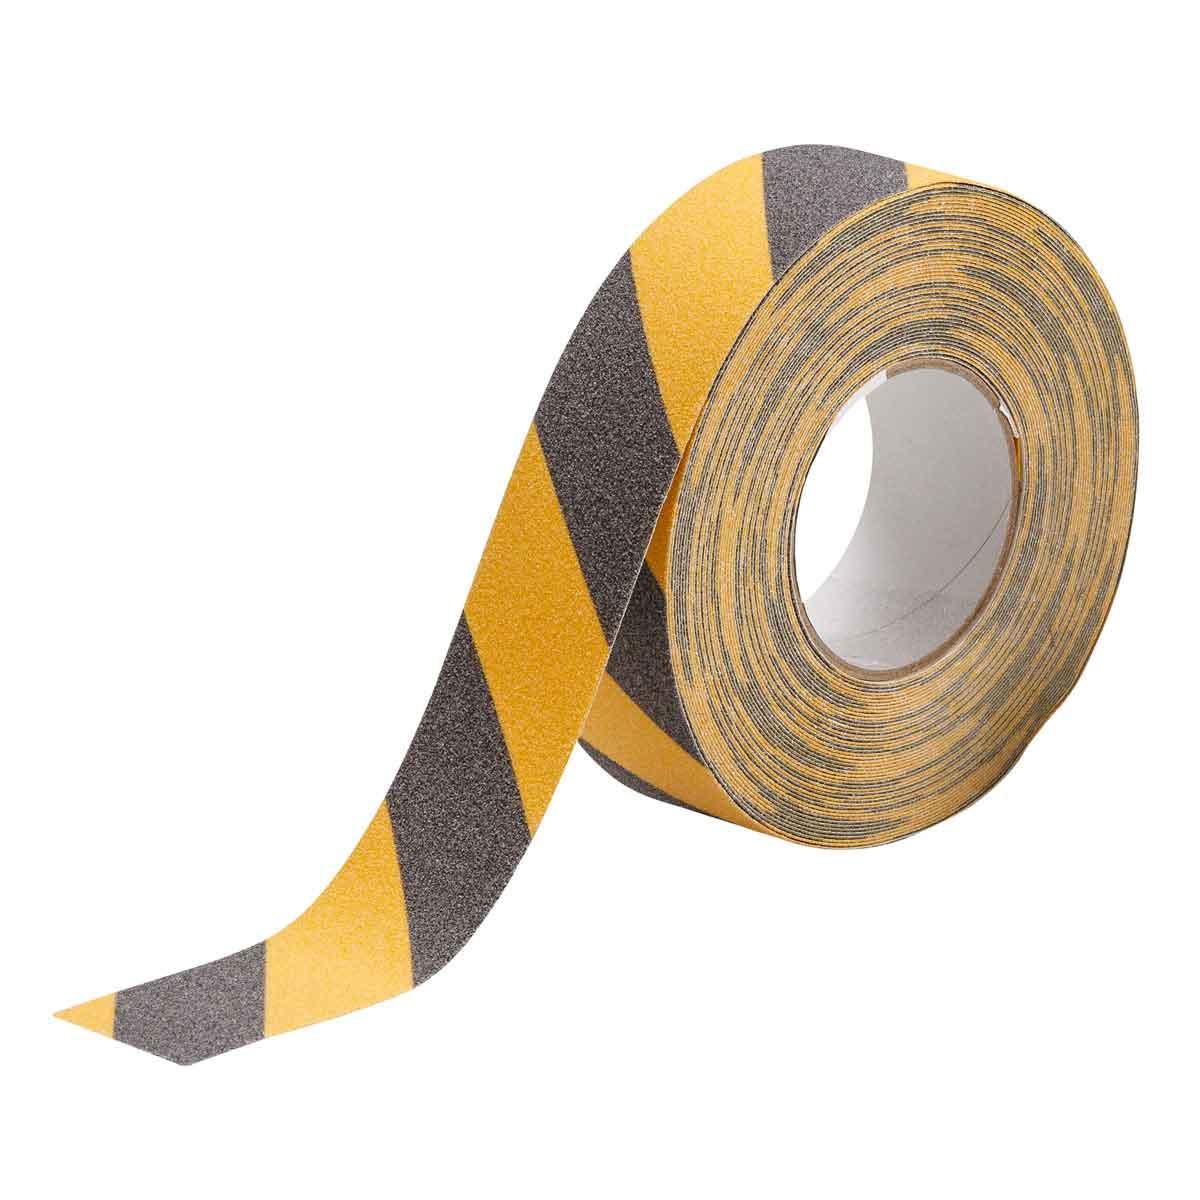 Safety-Walk™ 7100071690 700 Coarse Tape and Tread, 30 ft/Roll L x 4 in W x 0.048 in THK, Plastic Film Substrate, Solid Surface Pattern, Oily/Smooth Surface